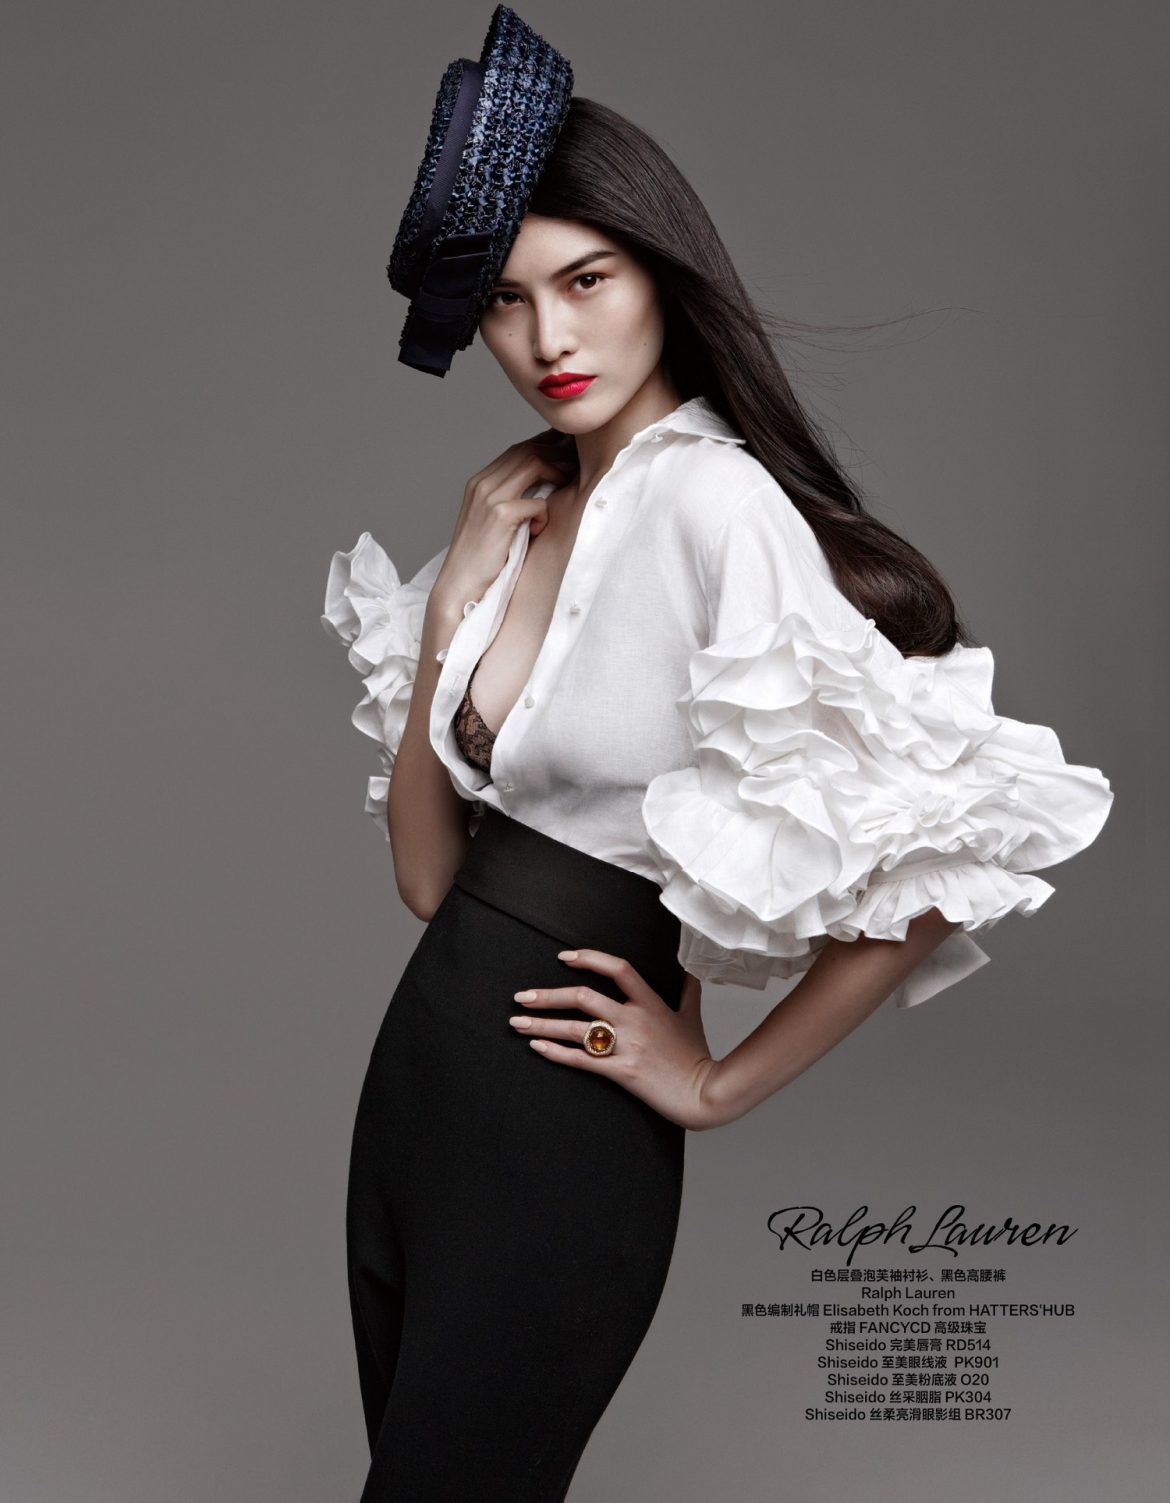 sui he-top female asian models-design home